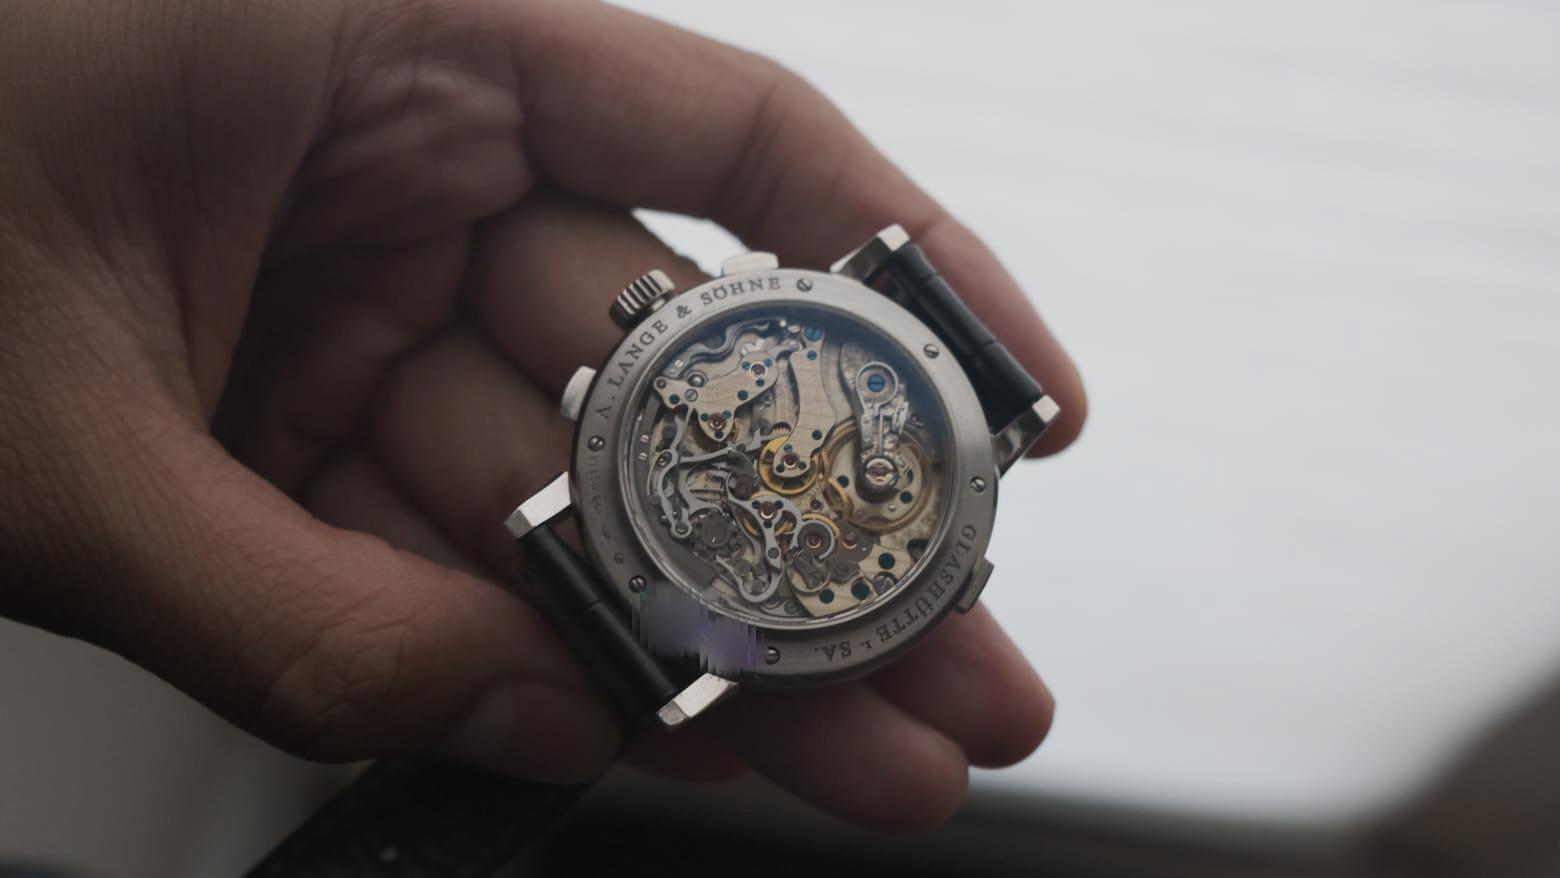 The back side of the A. Lange & Söhne Datograph Platinum 405.035 displayed in hand under natural white light.